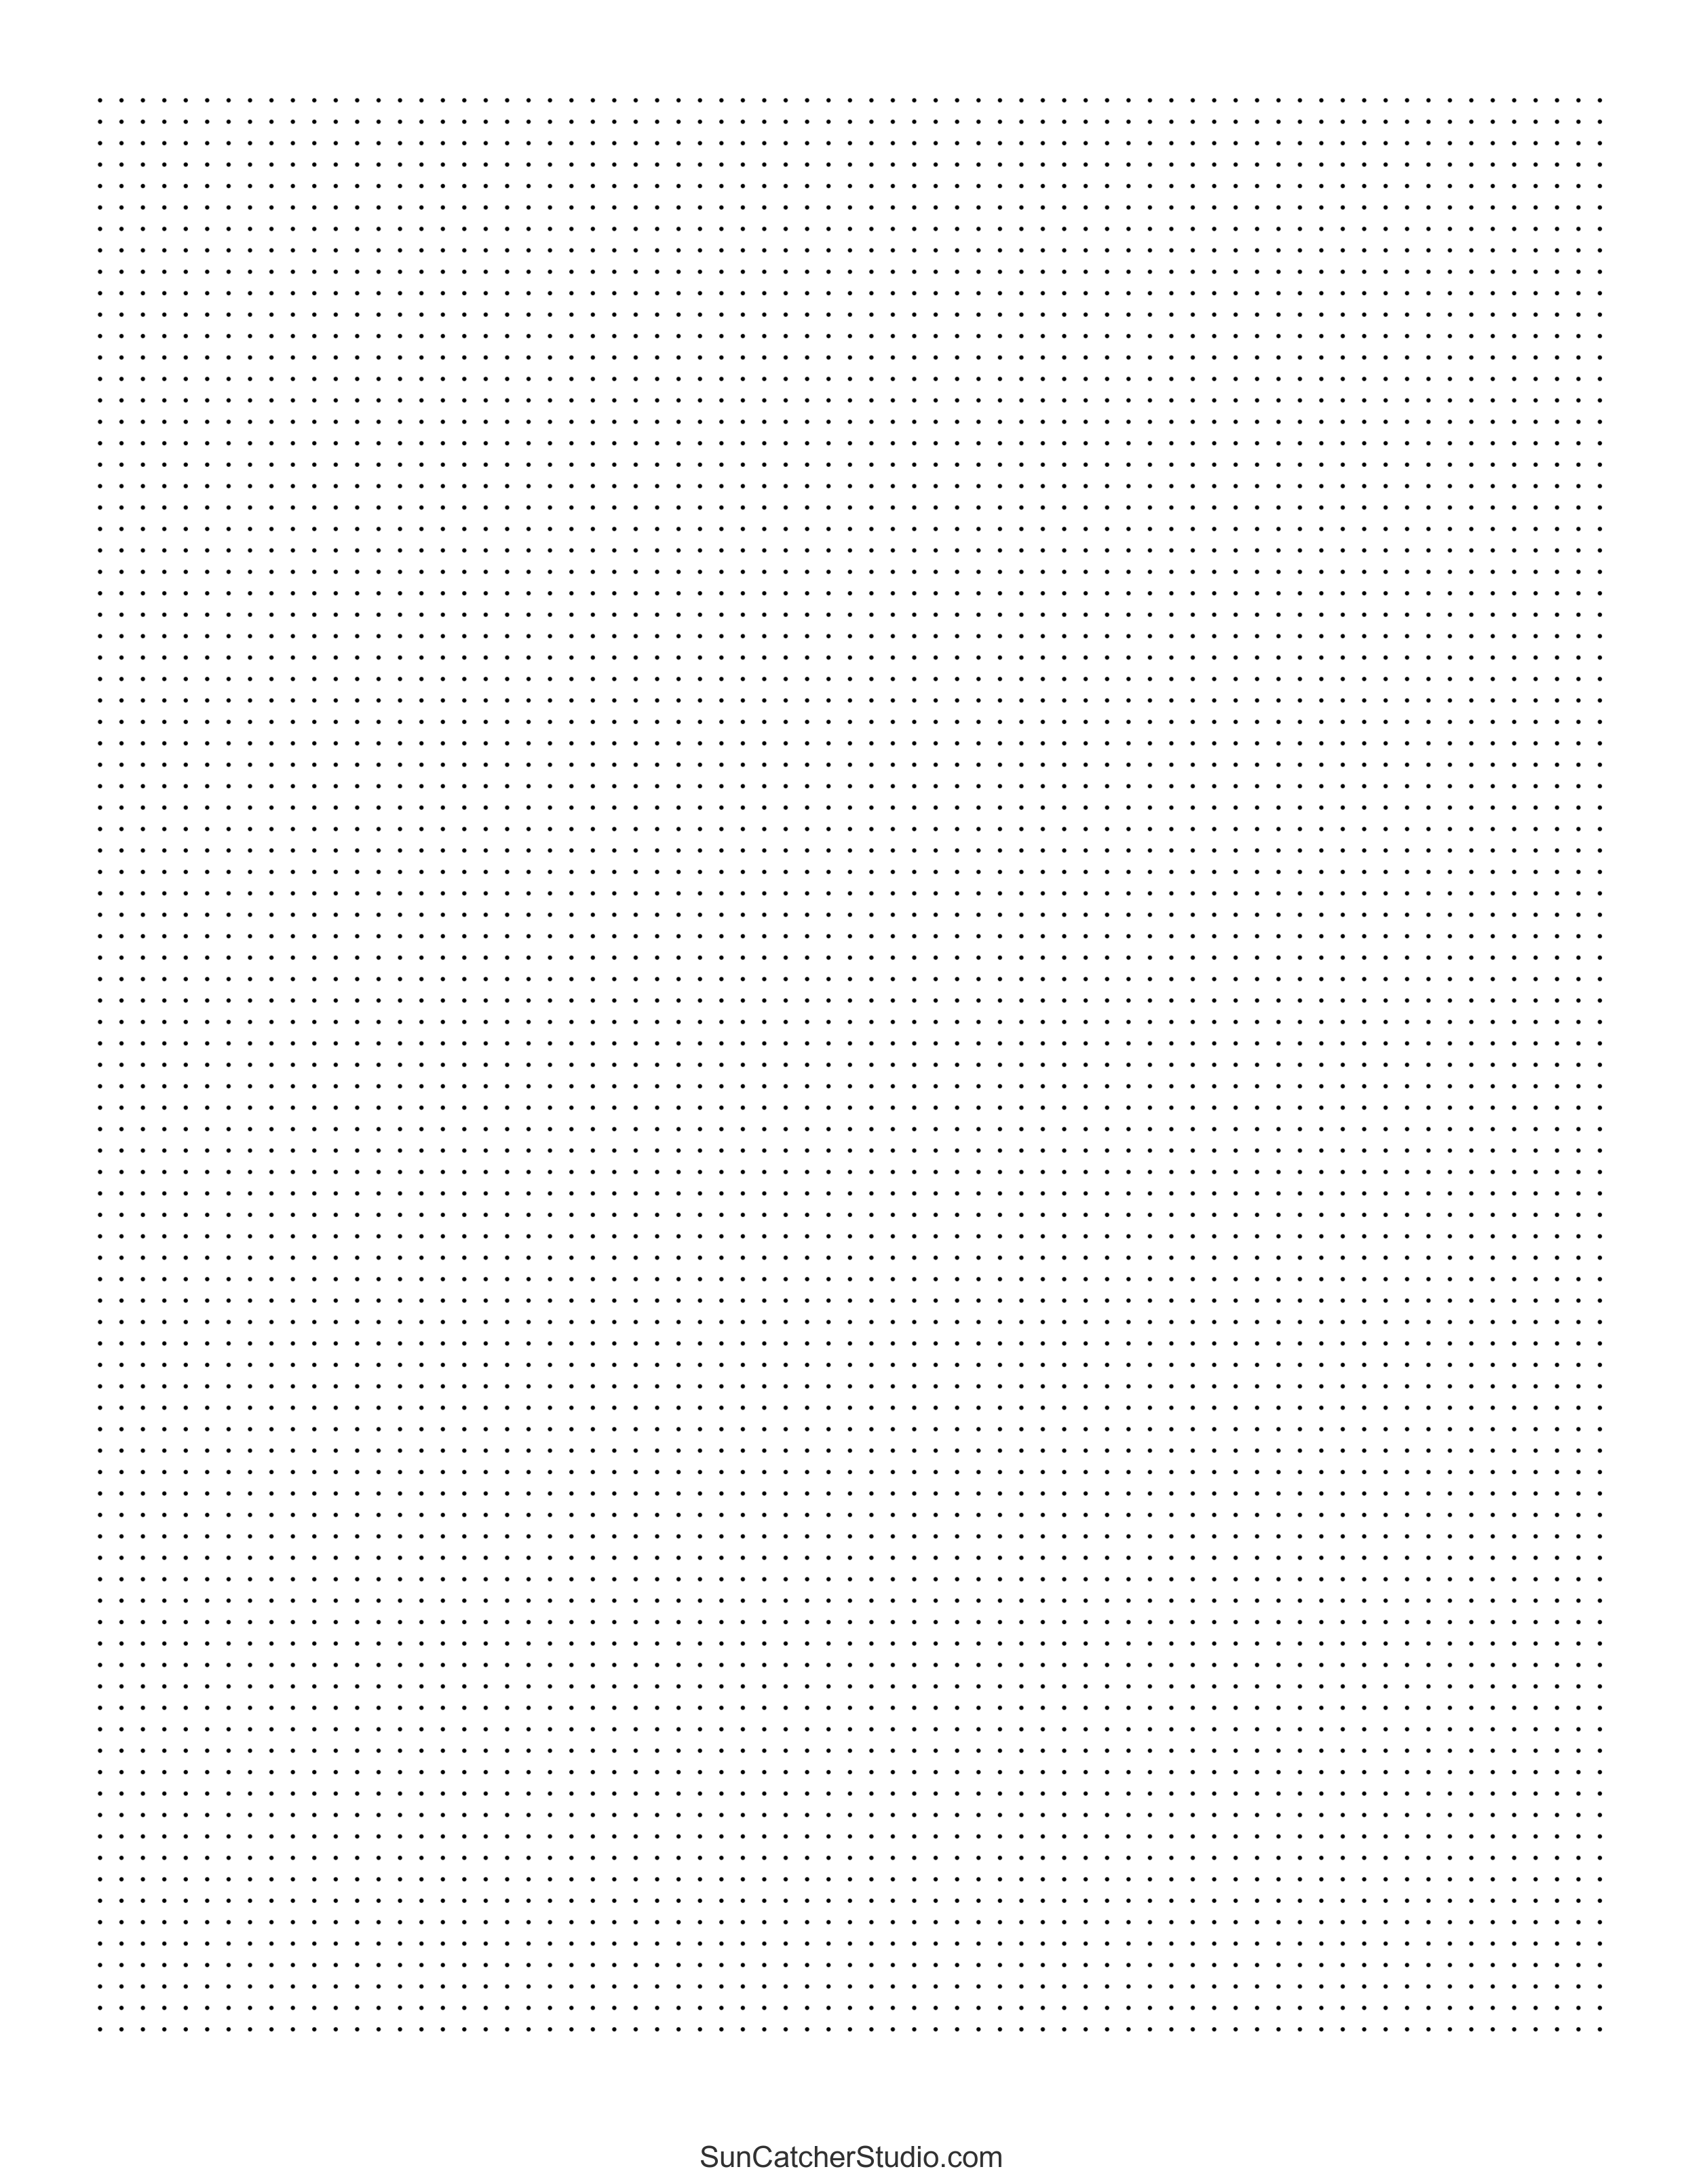 Free Printable Dot Paper: Dotted Grid Sheets (PDF & PNG) – DIY Projects,  Patterns, Monograms, Designs, Templates